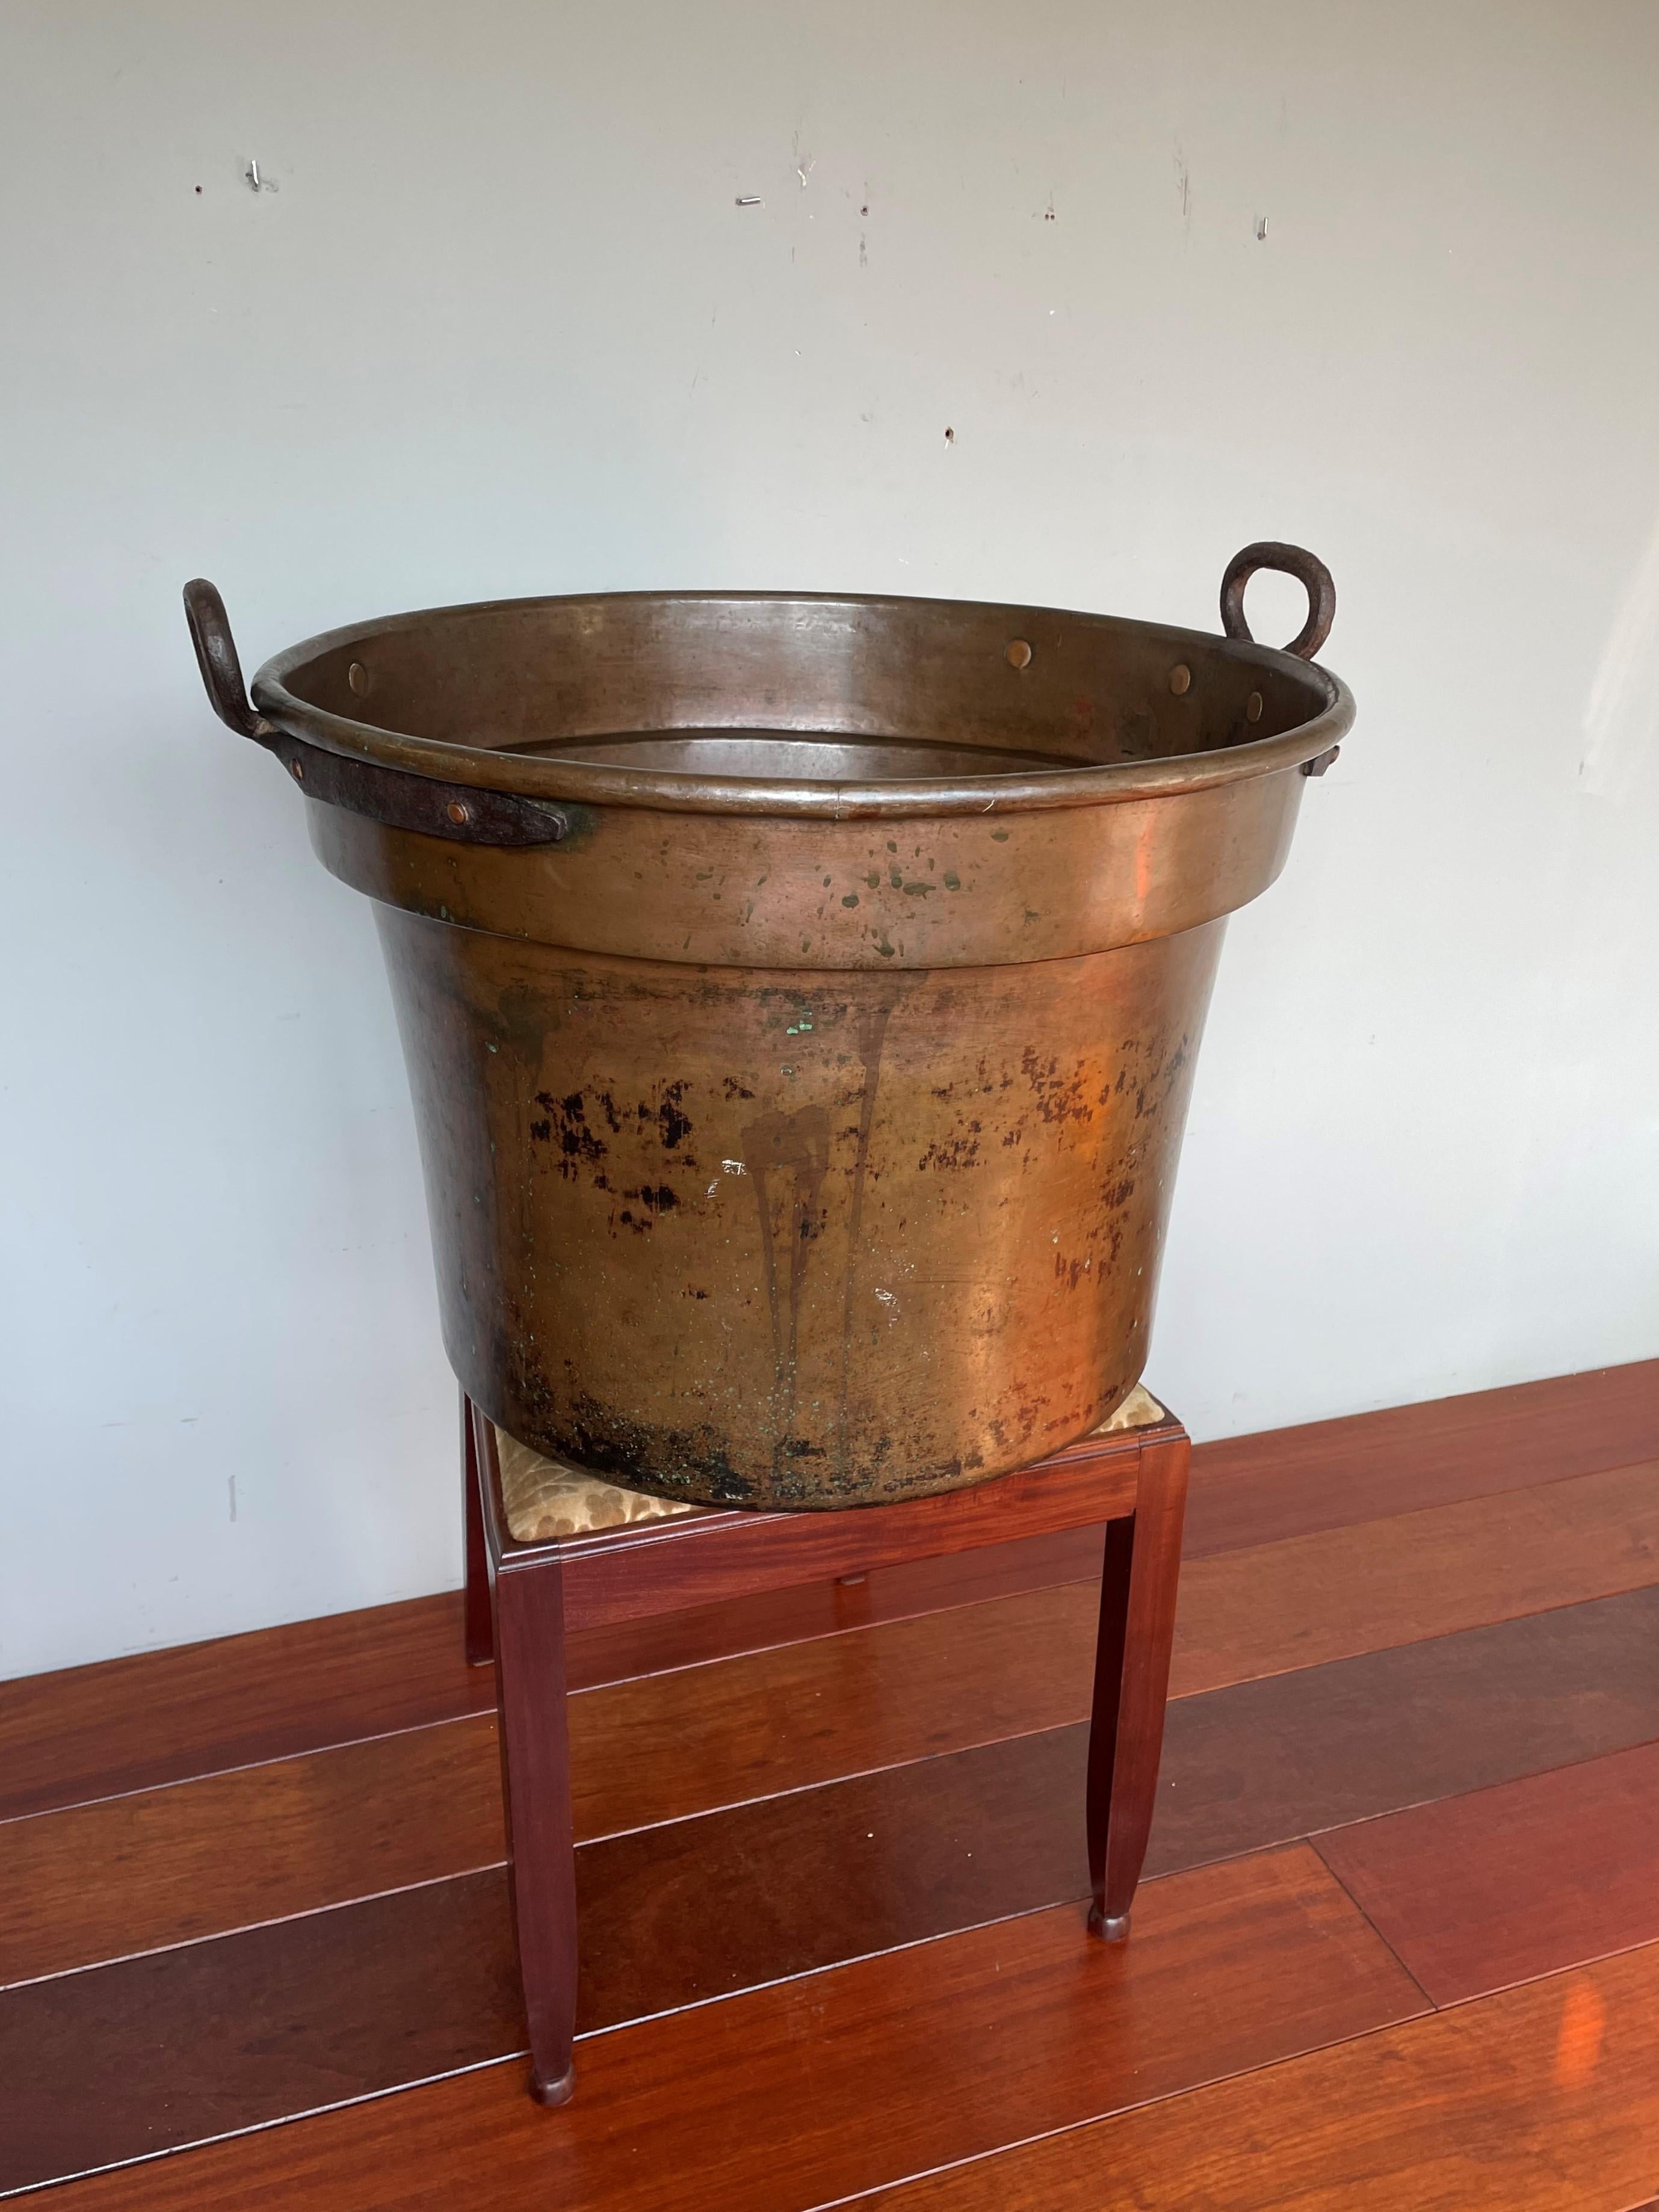 Country Largest Antique & Handcrafted Copper and Forged Iron Firewood Bucket or Planter